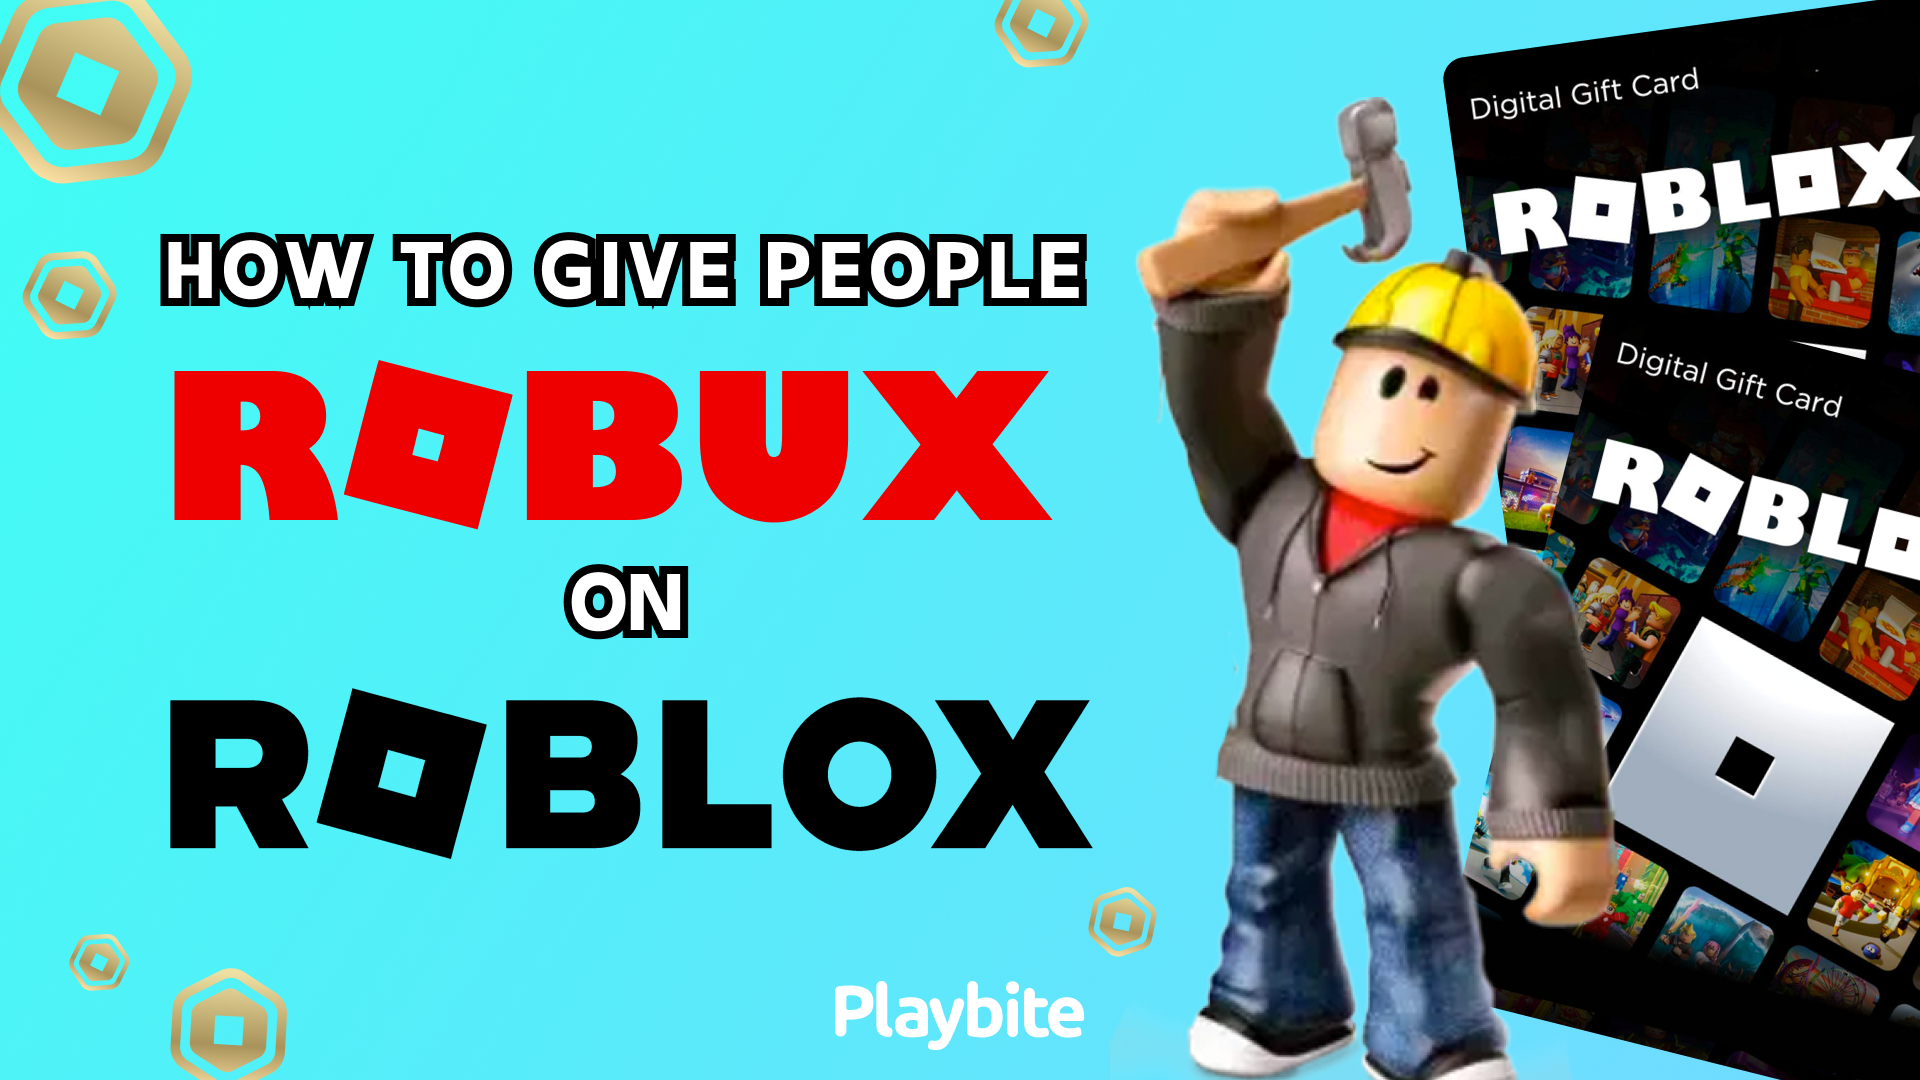 Wondering How to Gift Robux for Roblox?